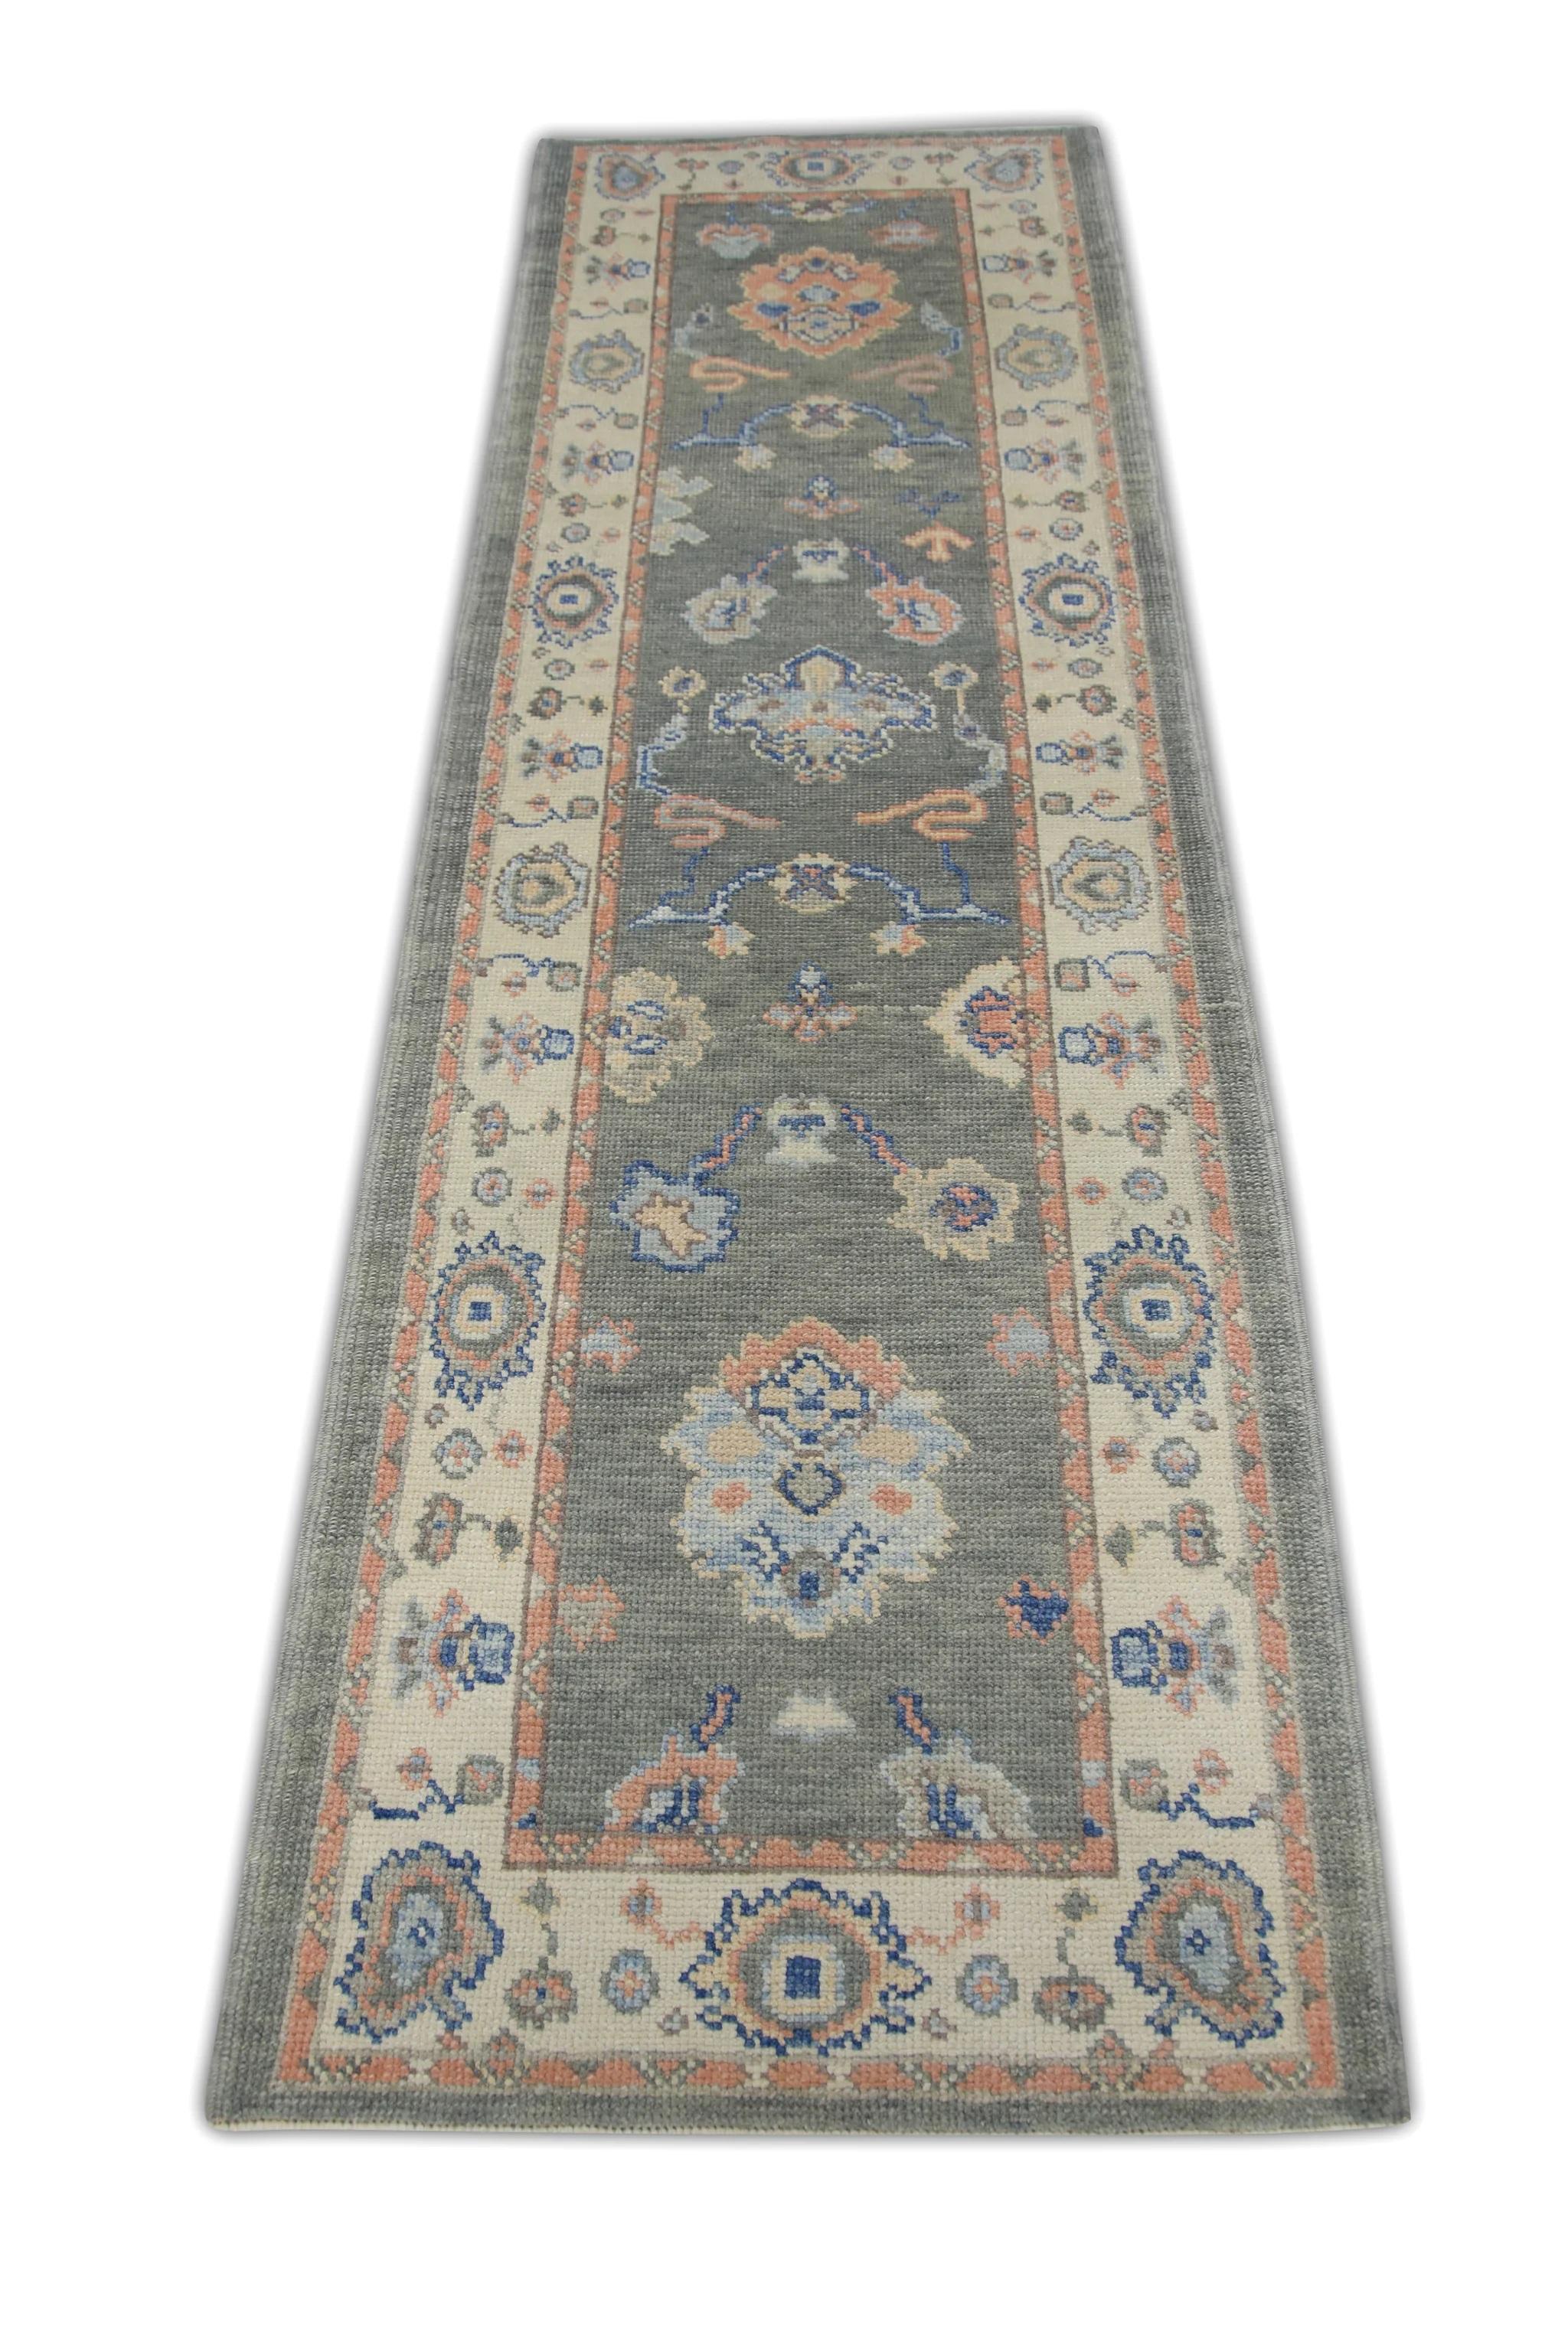 Contemporary Gray Handwoven Wool Turkish Oushak Rug in Pink & Blue Floral Design 2'7